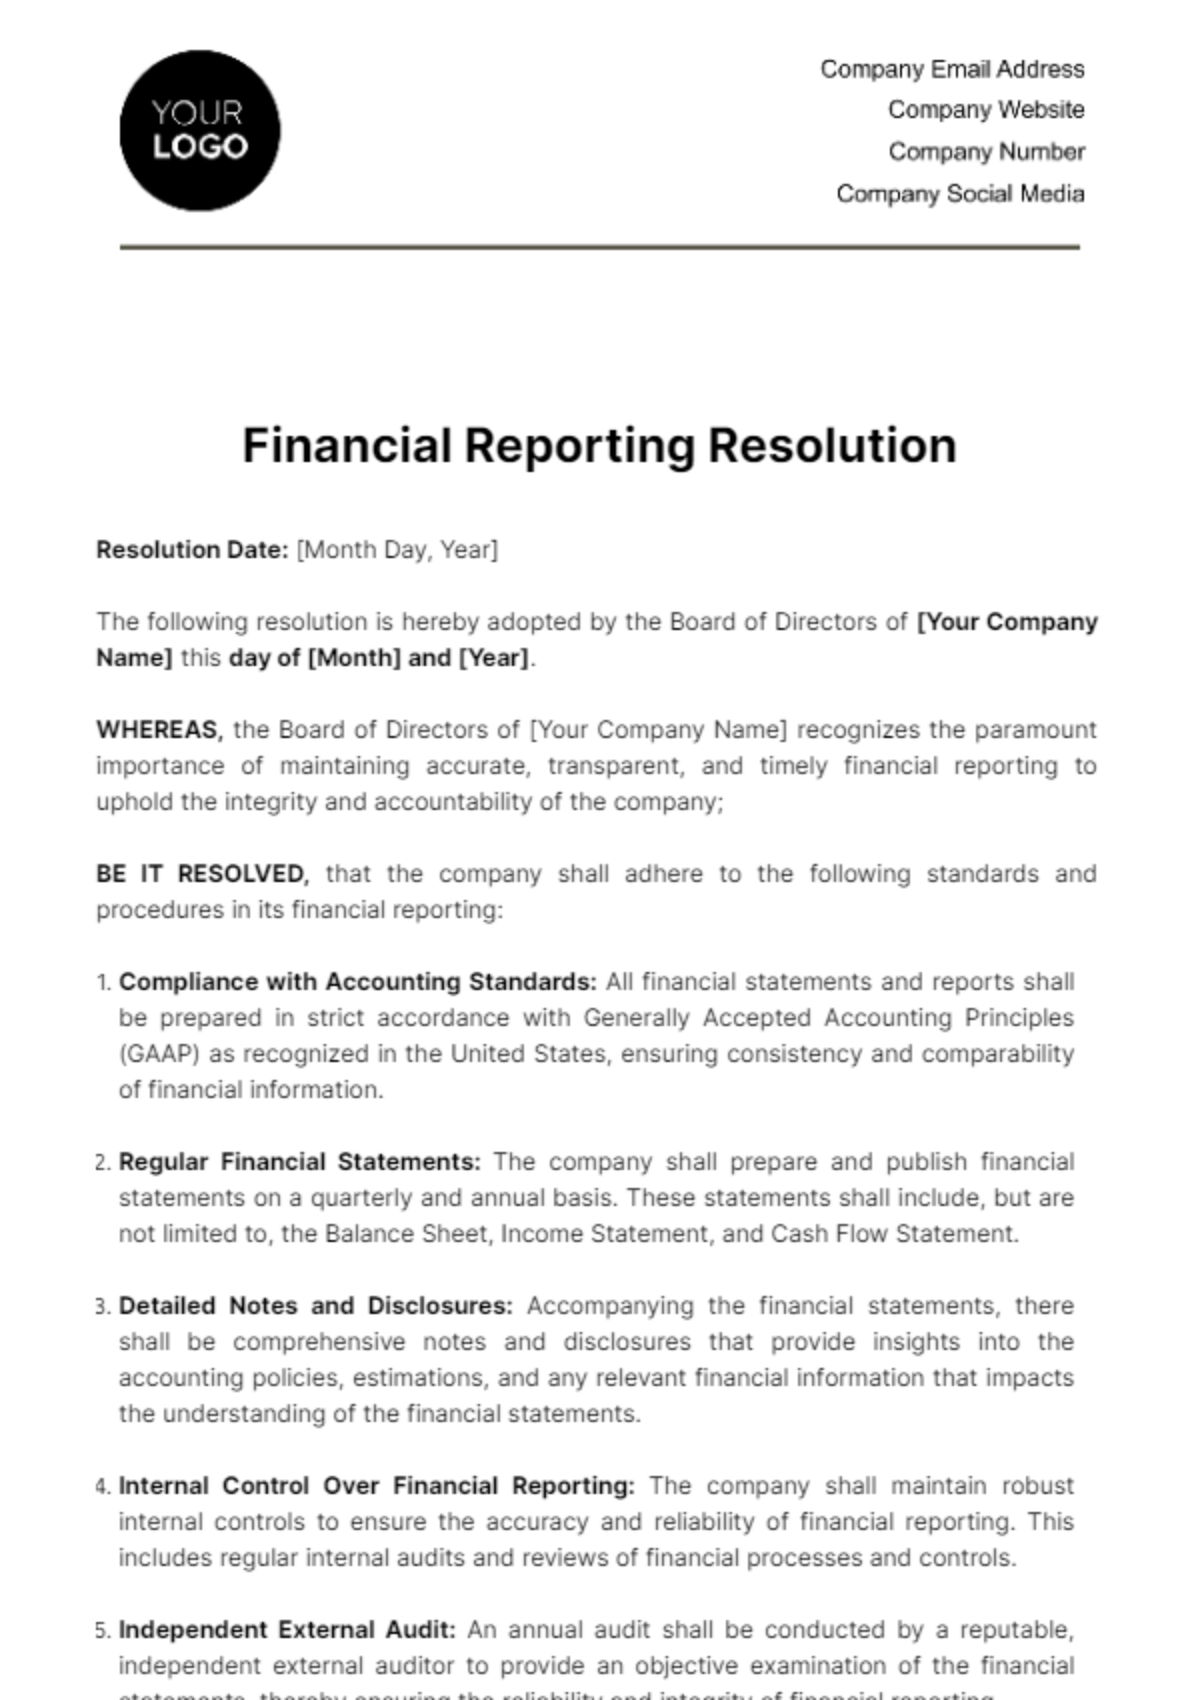 Free Financial Reporting Resolution Template